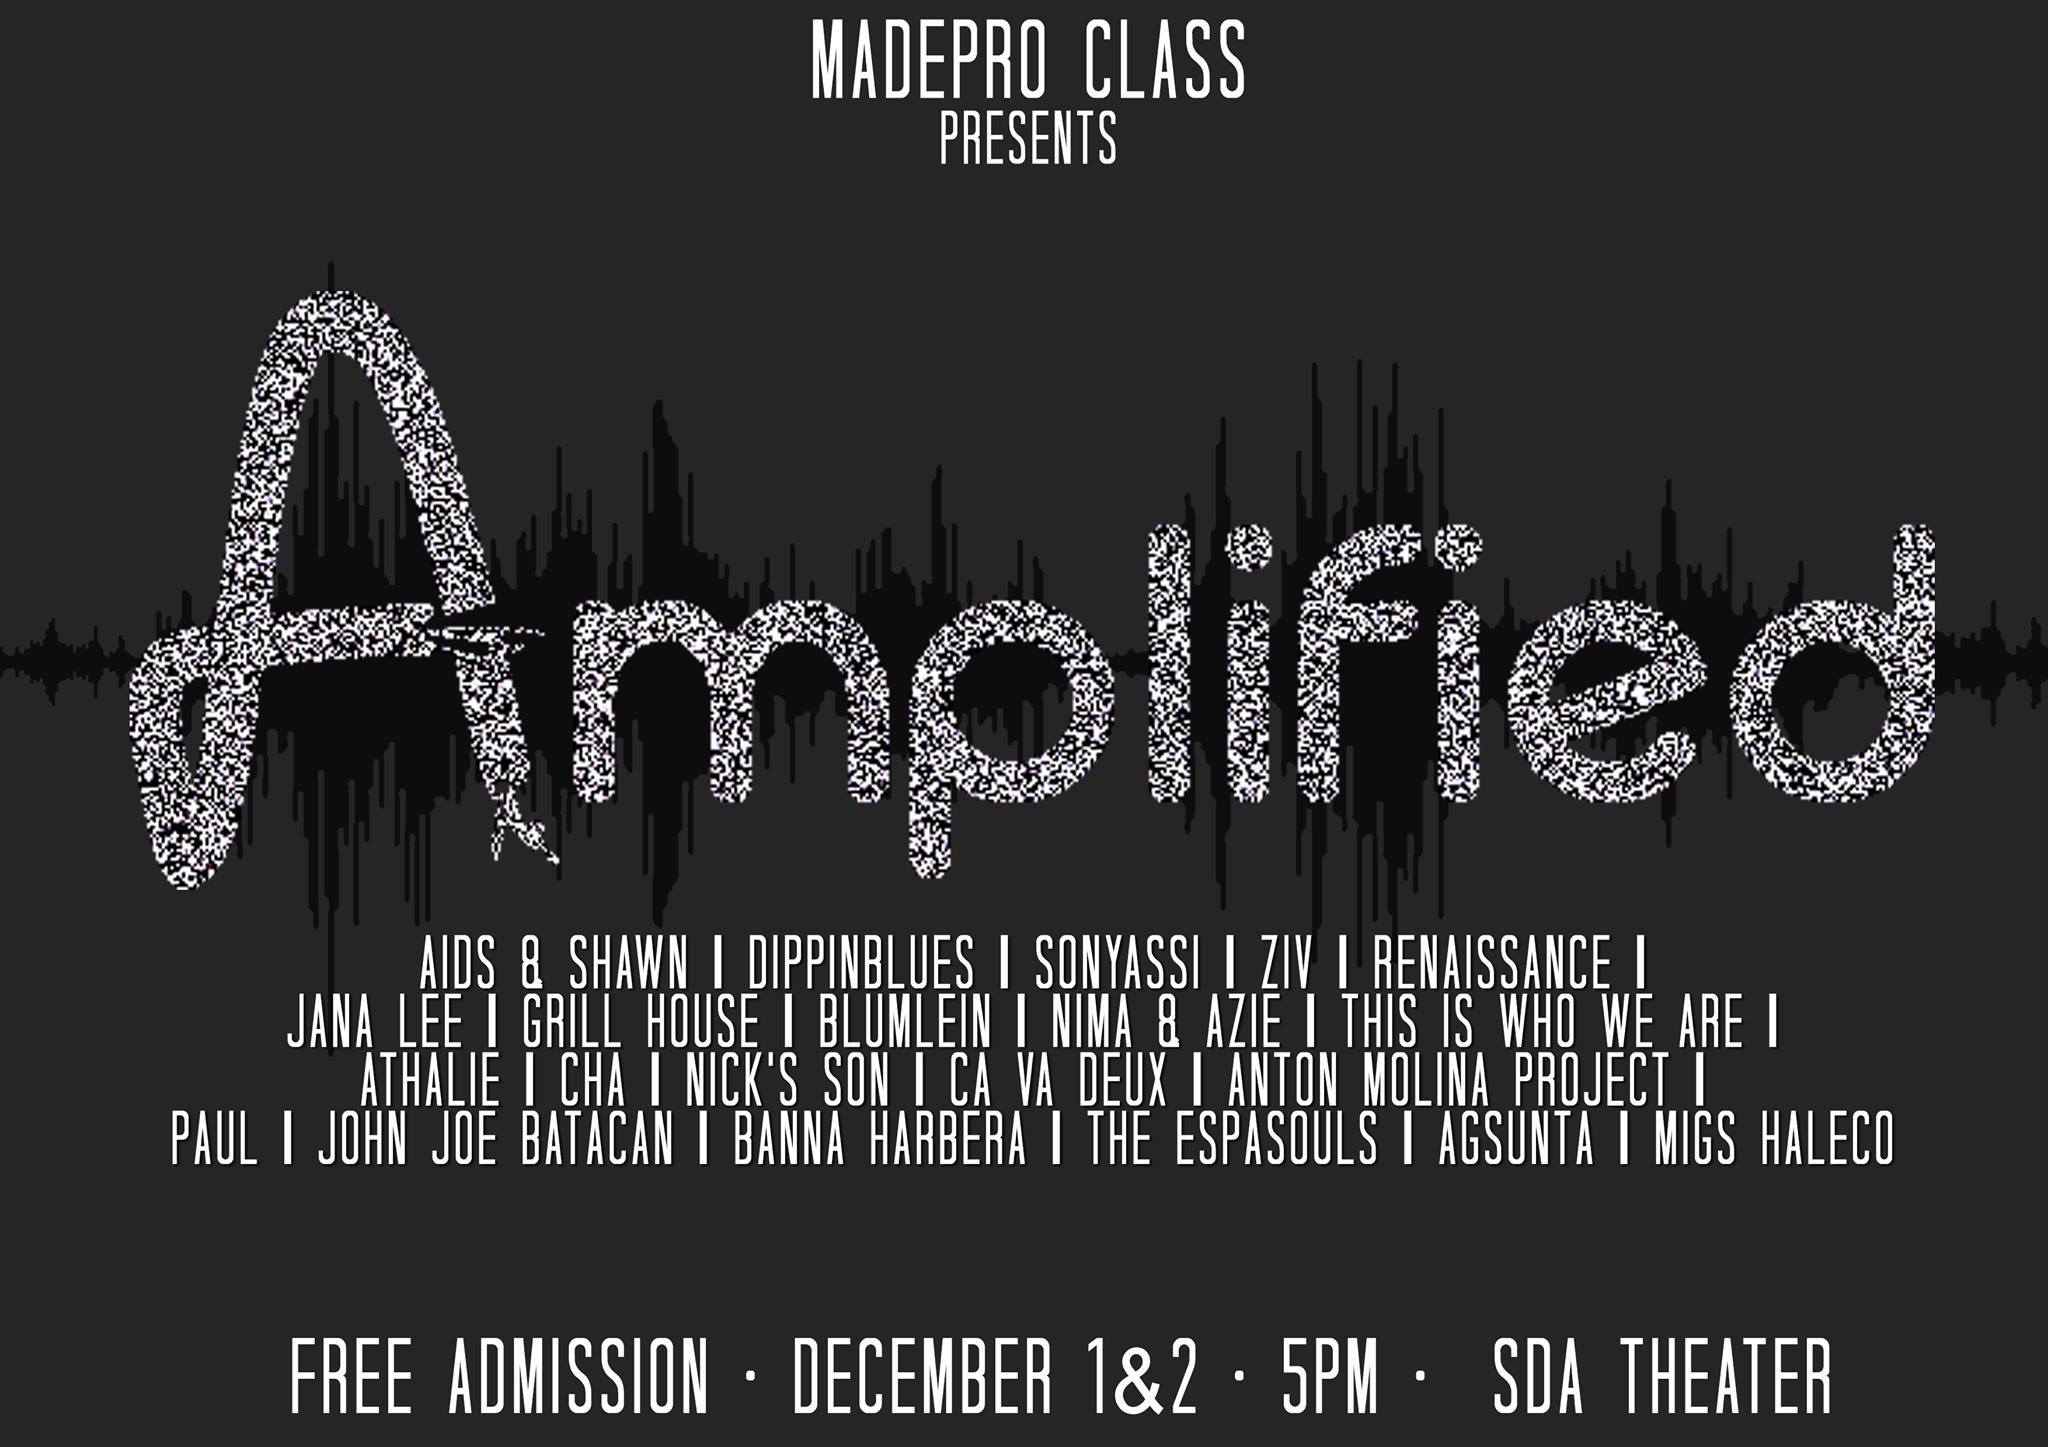 Amplified clock December 1 & 2, 2015 at 5:00pm - 9:00pm Happening Now · 83°F Mostly Cloudy pin Show Map SDA Theater, De La Salle-College of Saint Benilde Manila, Philippines Experience a concert of diversity - new talents performing a whole range of original compositions. Discover something extraordinary. Join us at the SDA Theater on December 1, 2015 at 5:00 AND December 2, 2015 at 5:00 and get Amplified. Free Entrance. Acts include: AGSUNTA | BANNA HARBERA | PAUL | THE ESPASOULS | ATHALIE | NICK'S SON | AZIE AND NIMA | THE RENAISSANCE TEAM | JOHN JOE | ANTON MOLINA PROJECT | CHA | MULI | MOMENTO | SONYASSI | ÇA VA DEUX | BLUMLEIN | A4RT | JOURNEY | AIDS AND SHAWN | DIPPIN BLUES | ZIV | GRILL HOUSE | THIS IS WHO WE ARE | CA VA DEUX | MIGZ HALECO